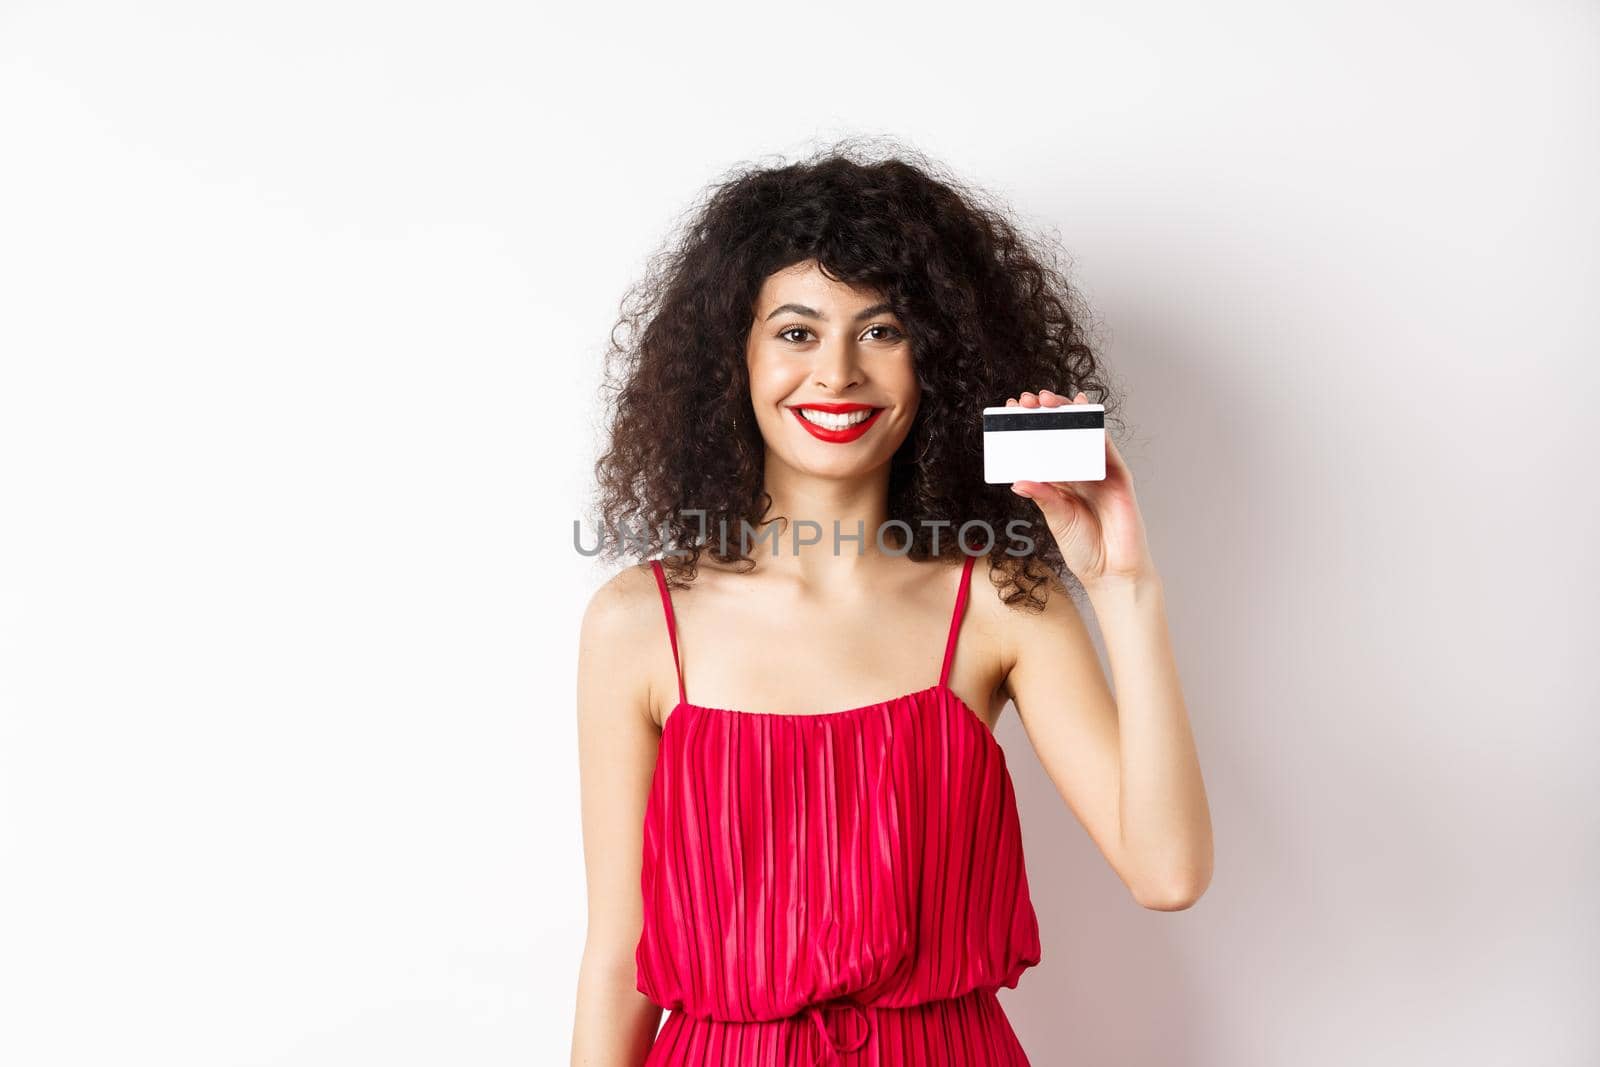 Beautiful woman in red trendy dress and makeup, showing plastic credit card and smiling, recommending offer, standing on white background.